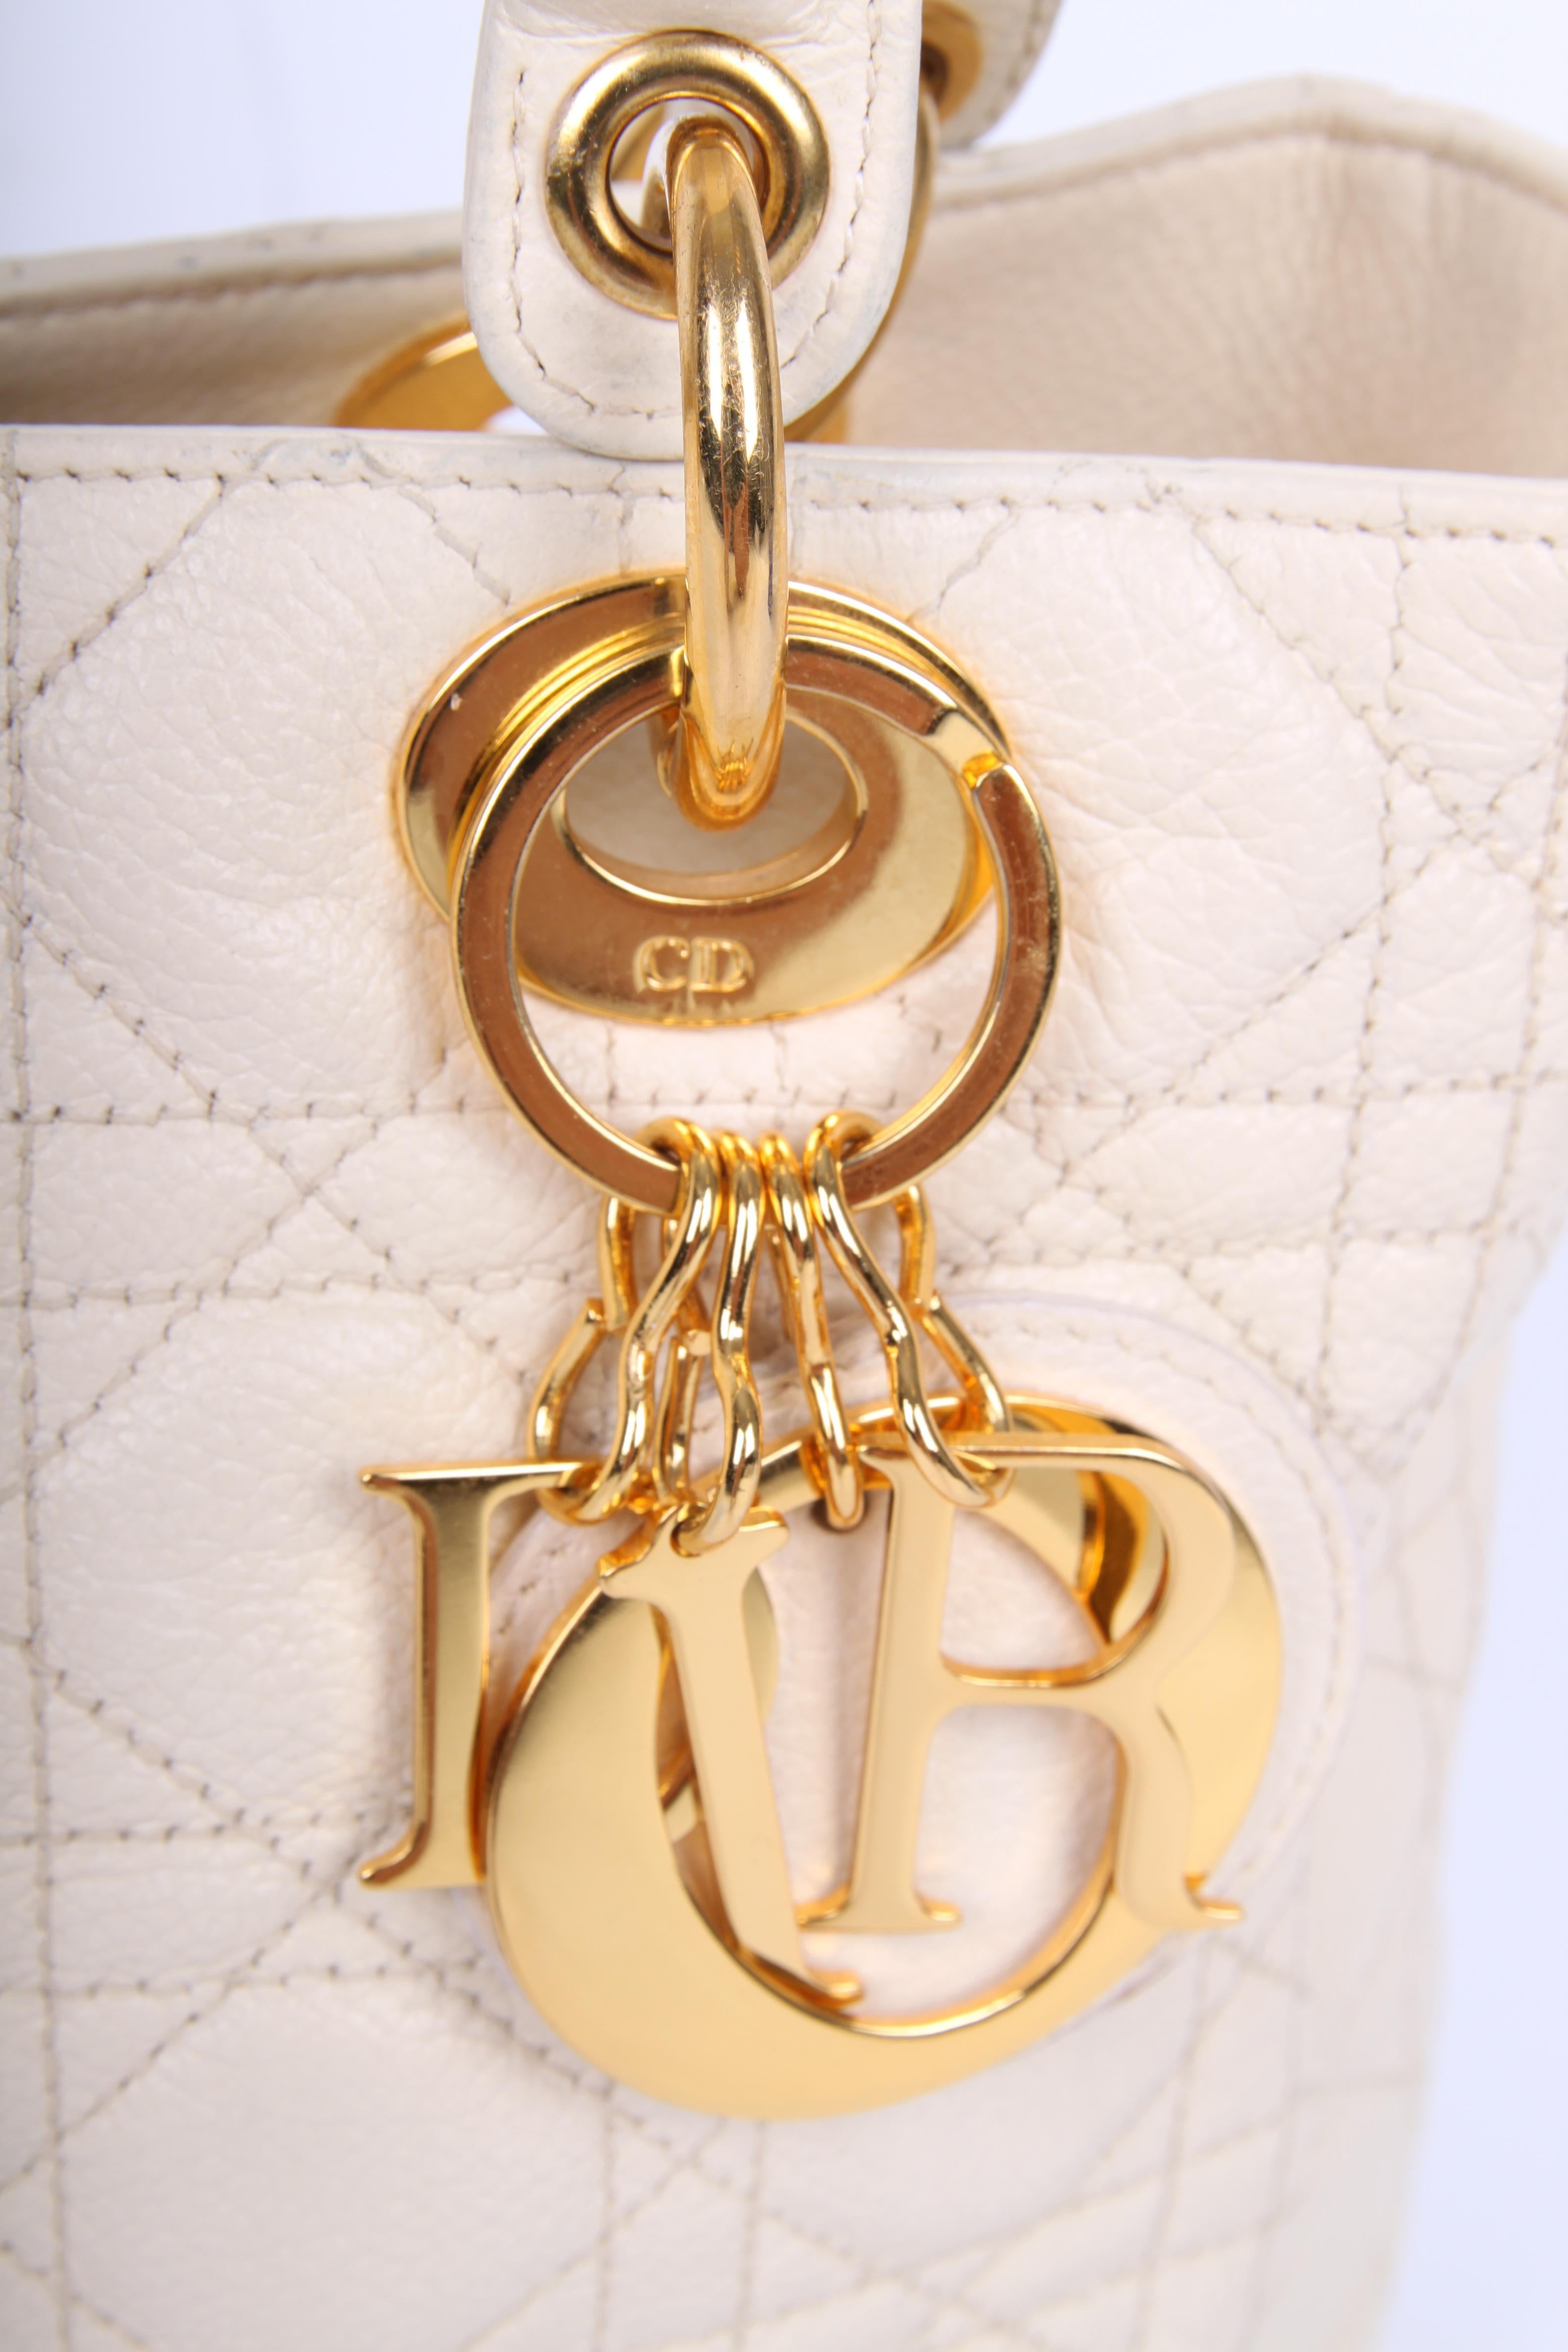 Oooh la laaaa! A marvellous bag by Dior... The My Lady Dior Bag!

This cutie is made of soft grained calfskin leather, quilted in the famous diamond pattern. Two stirdy handles on top, on one of them you will find four large gold-tone charms that